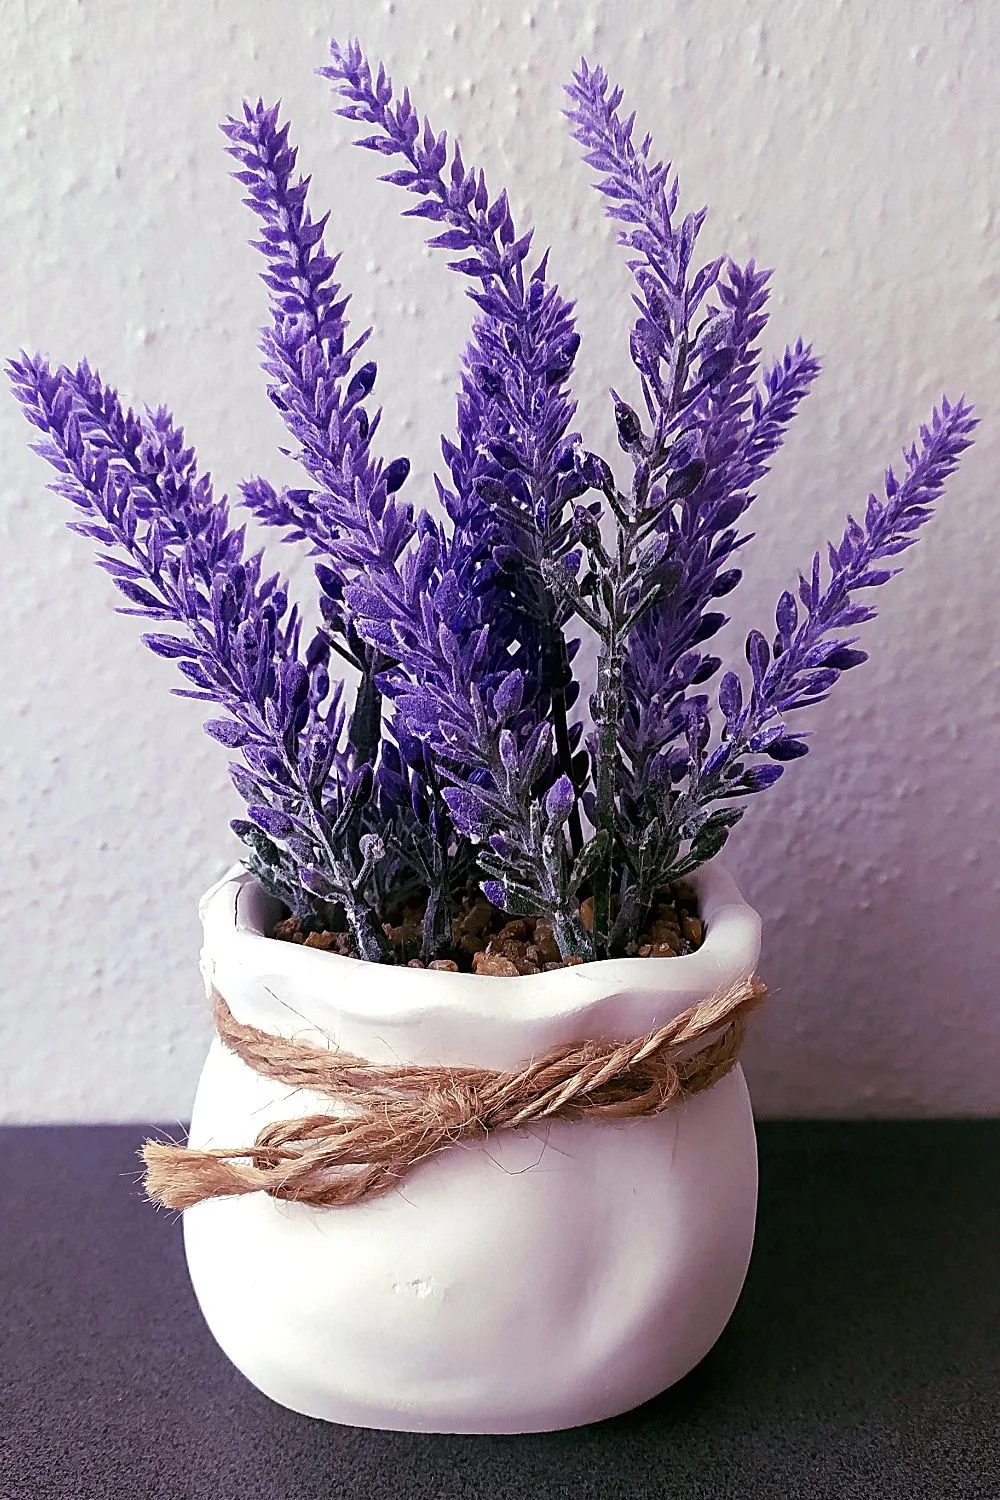 Lavender is known for its scented blooms, hence, it's a great flower to add to your already beautiful southeast-facing garden